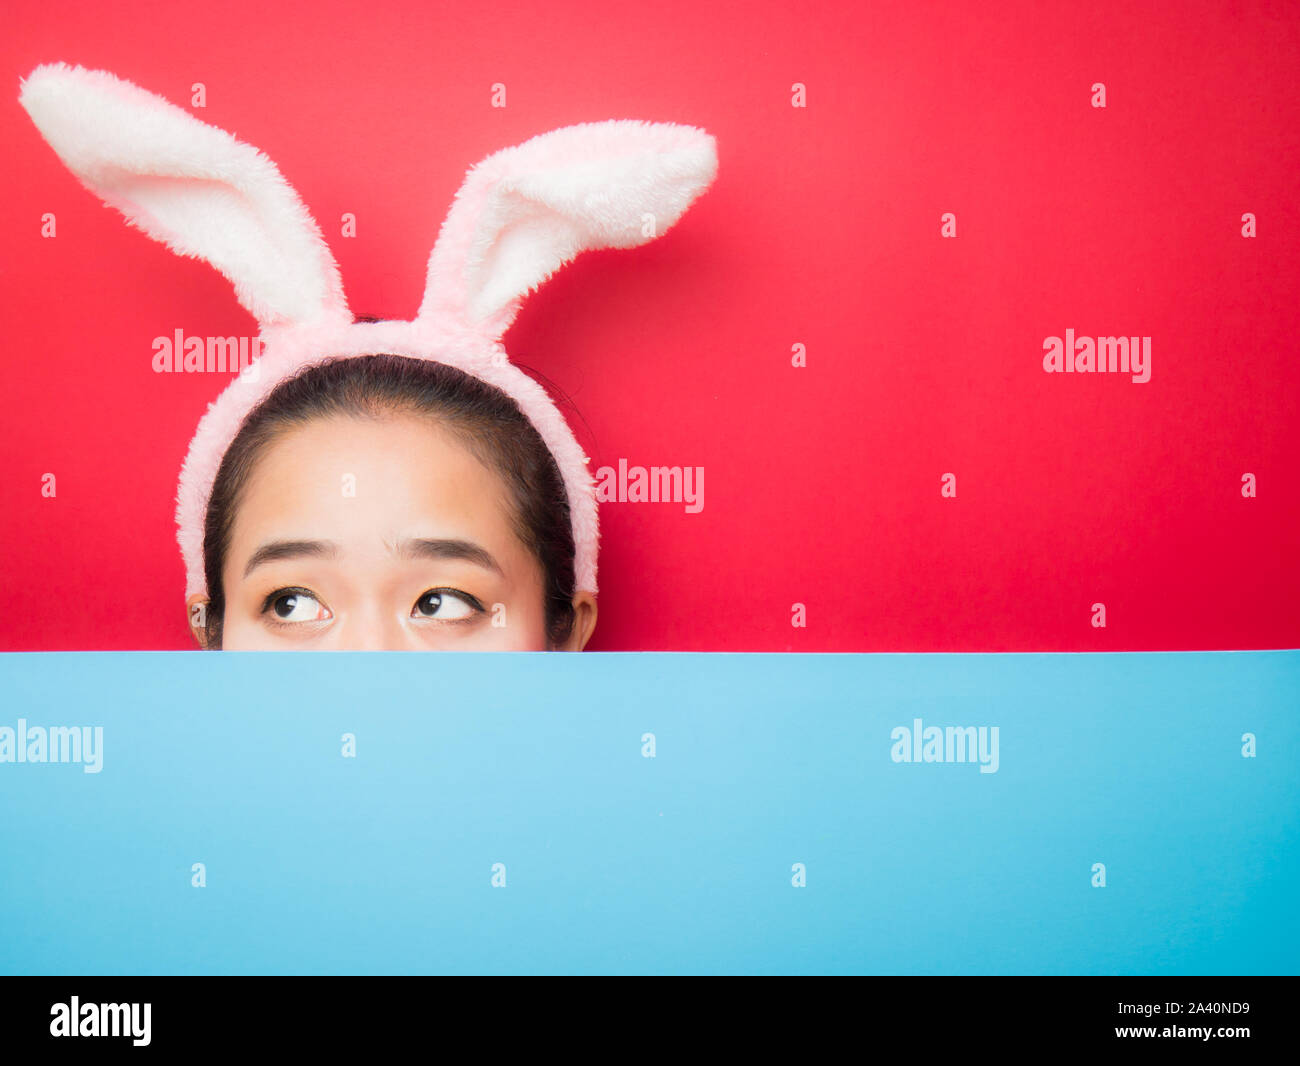 Cute teenage girl wearing bunny ears headband on sky and red background. Attractive young woman on a bright red and sky background. Stock Photo